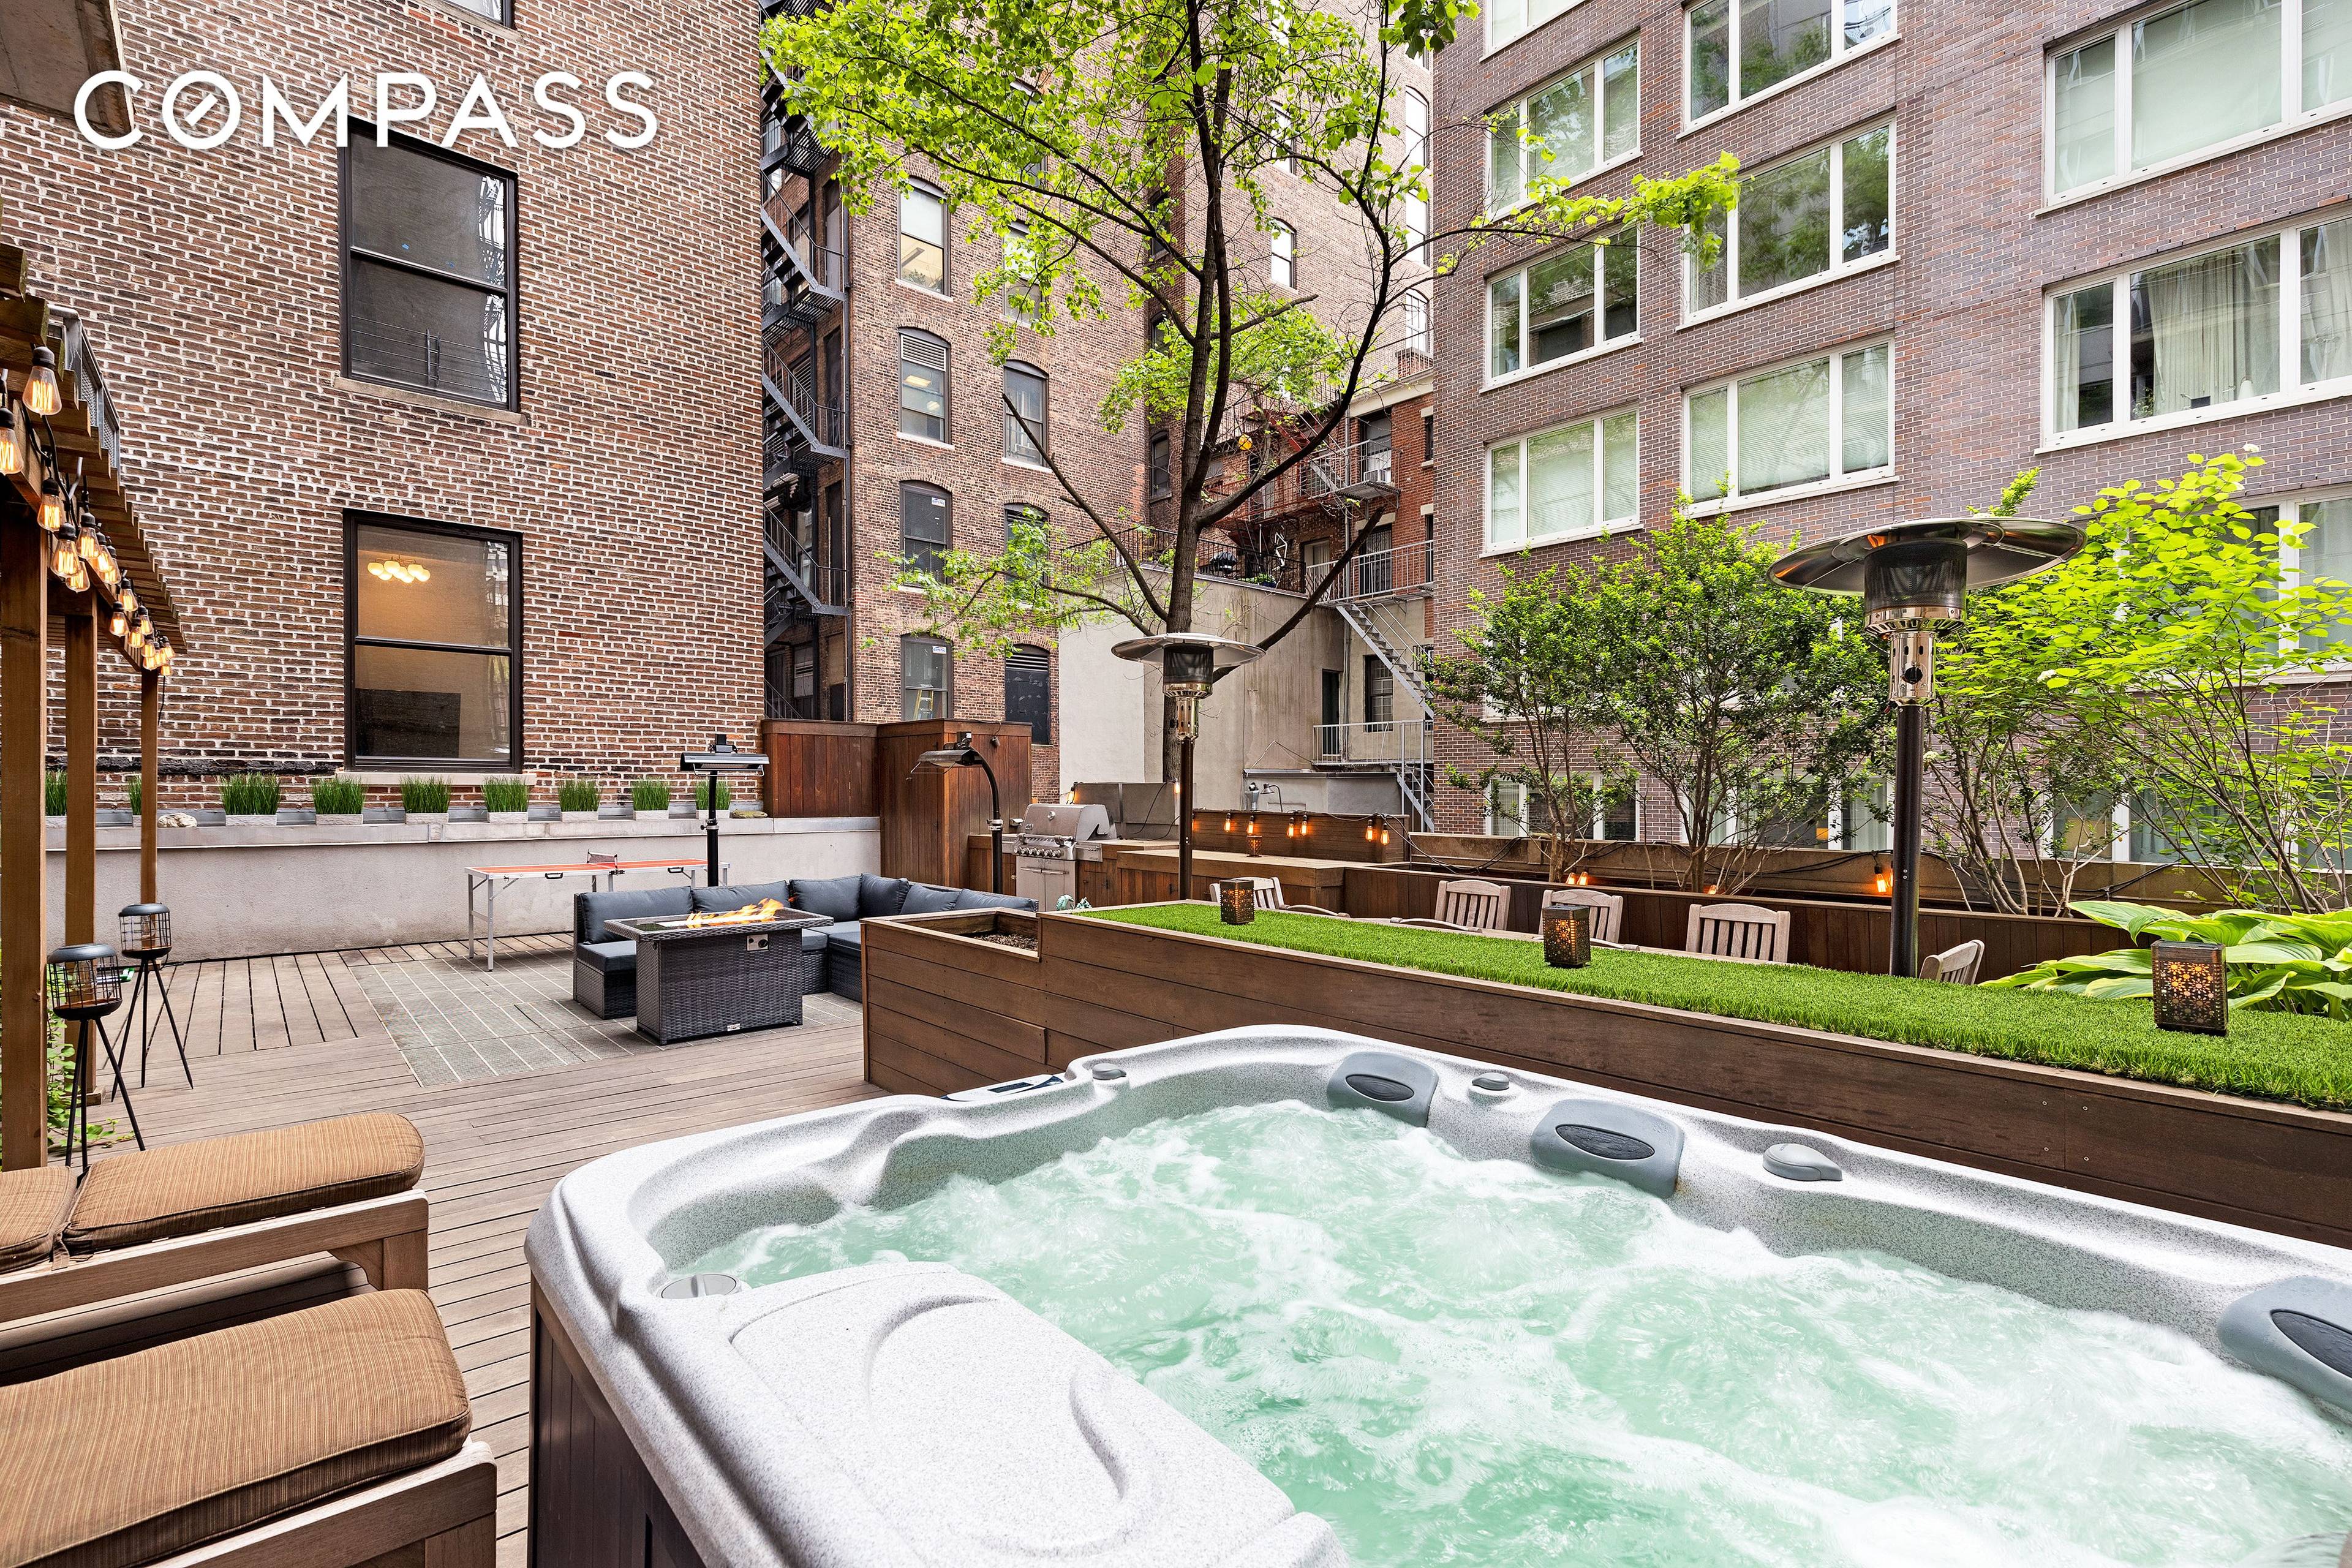 Enjoy unbelievable indoor outdoor living in the heart of Chelsea in this beautifully renovated three bedroom, three bathroom luxury loft featuring a glorious 1, 035 square foot private terrace the ...